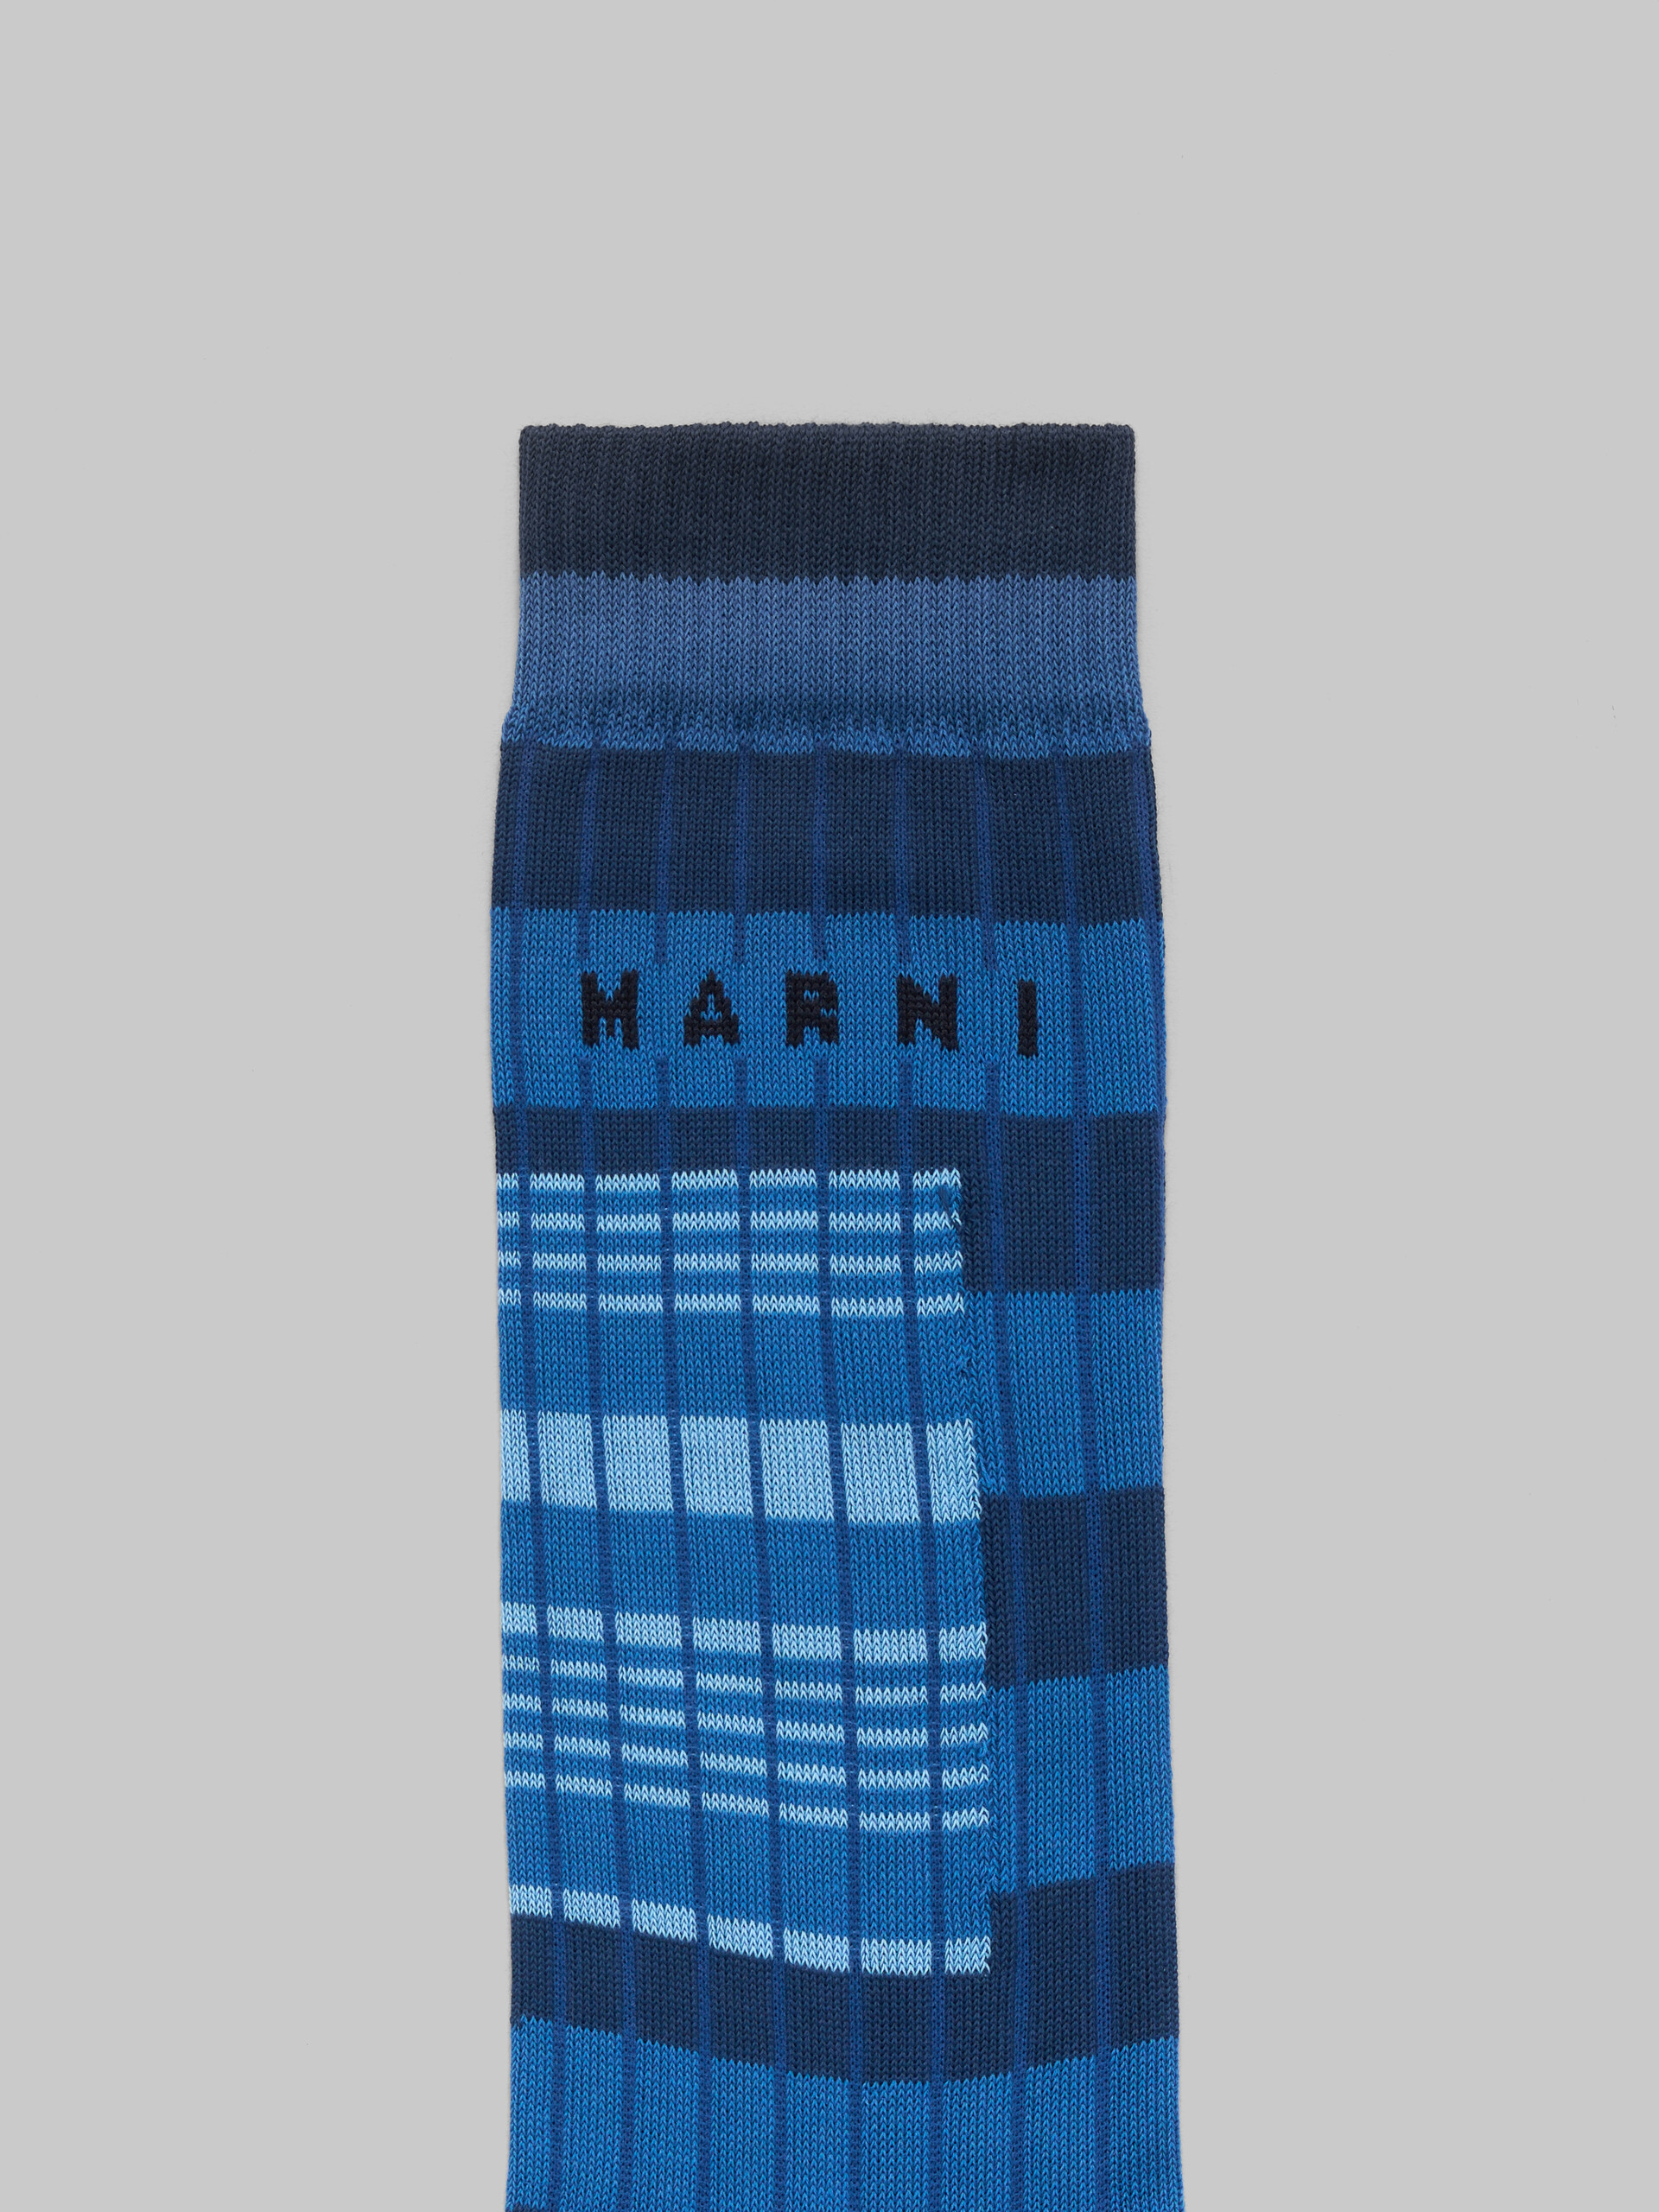 Blue ribbed cotton socks with contrast stripes - Socks - Image 3